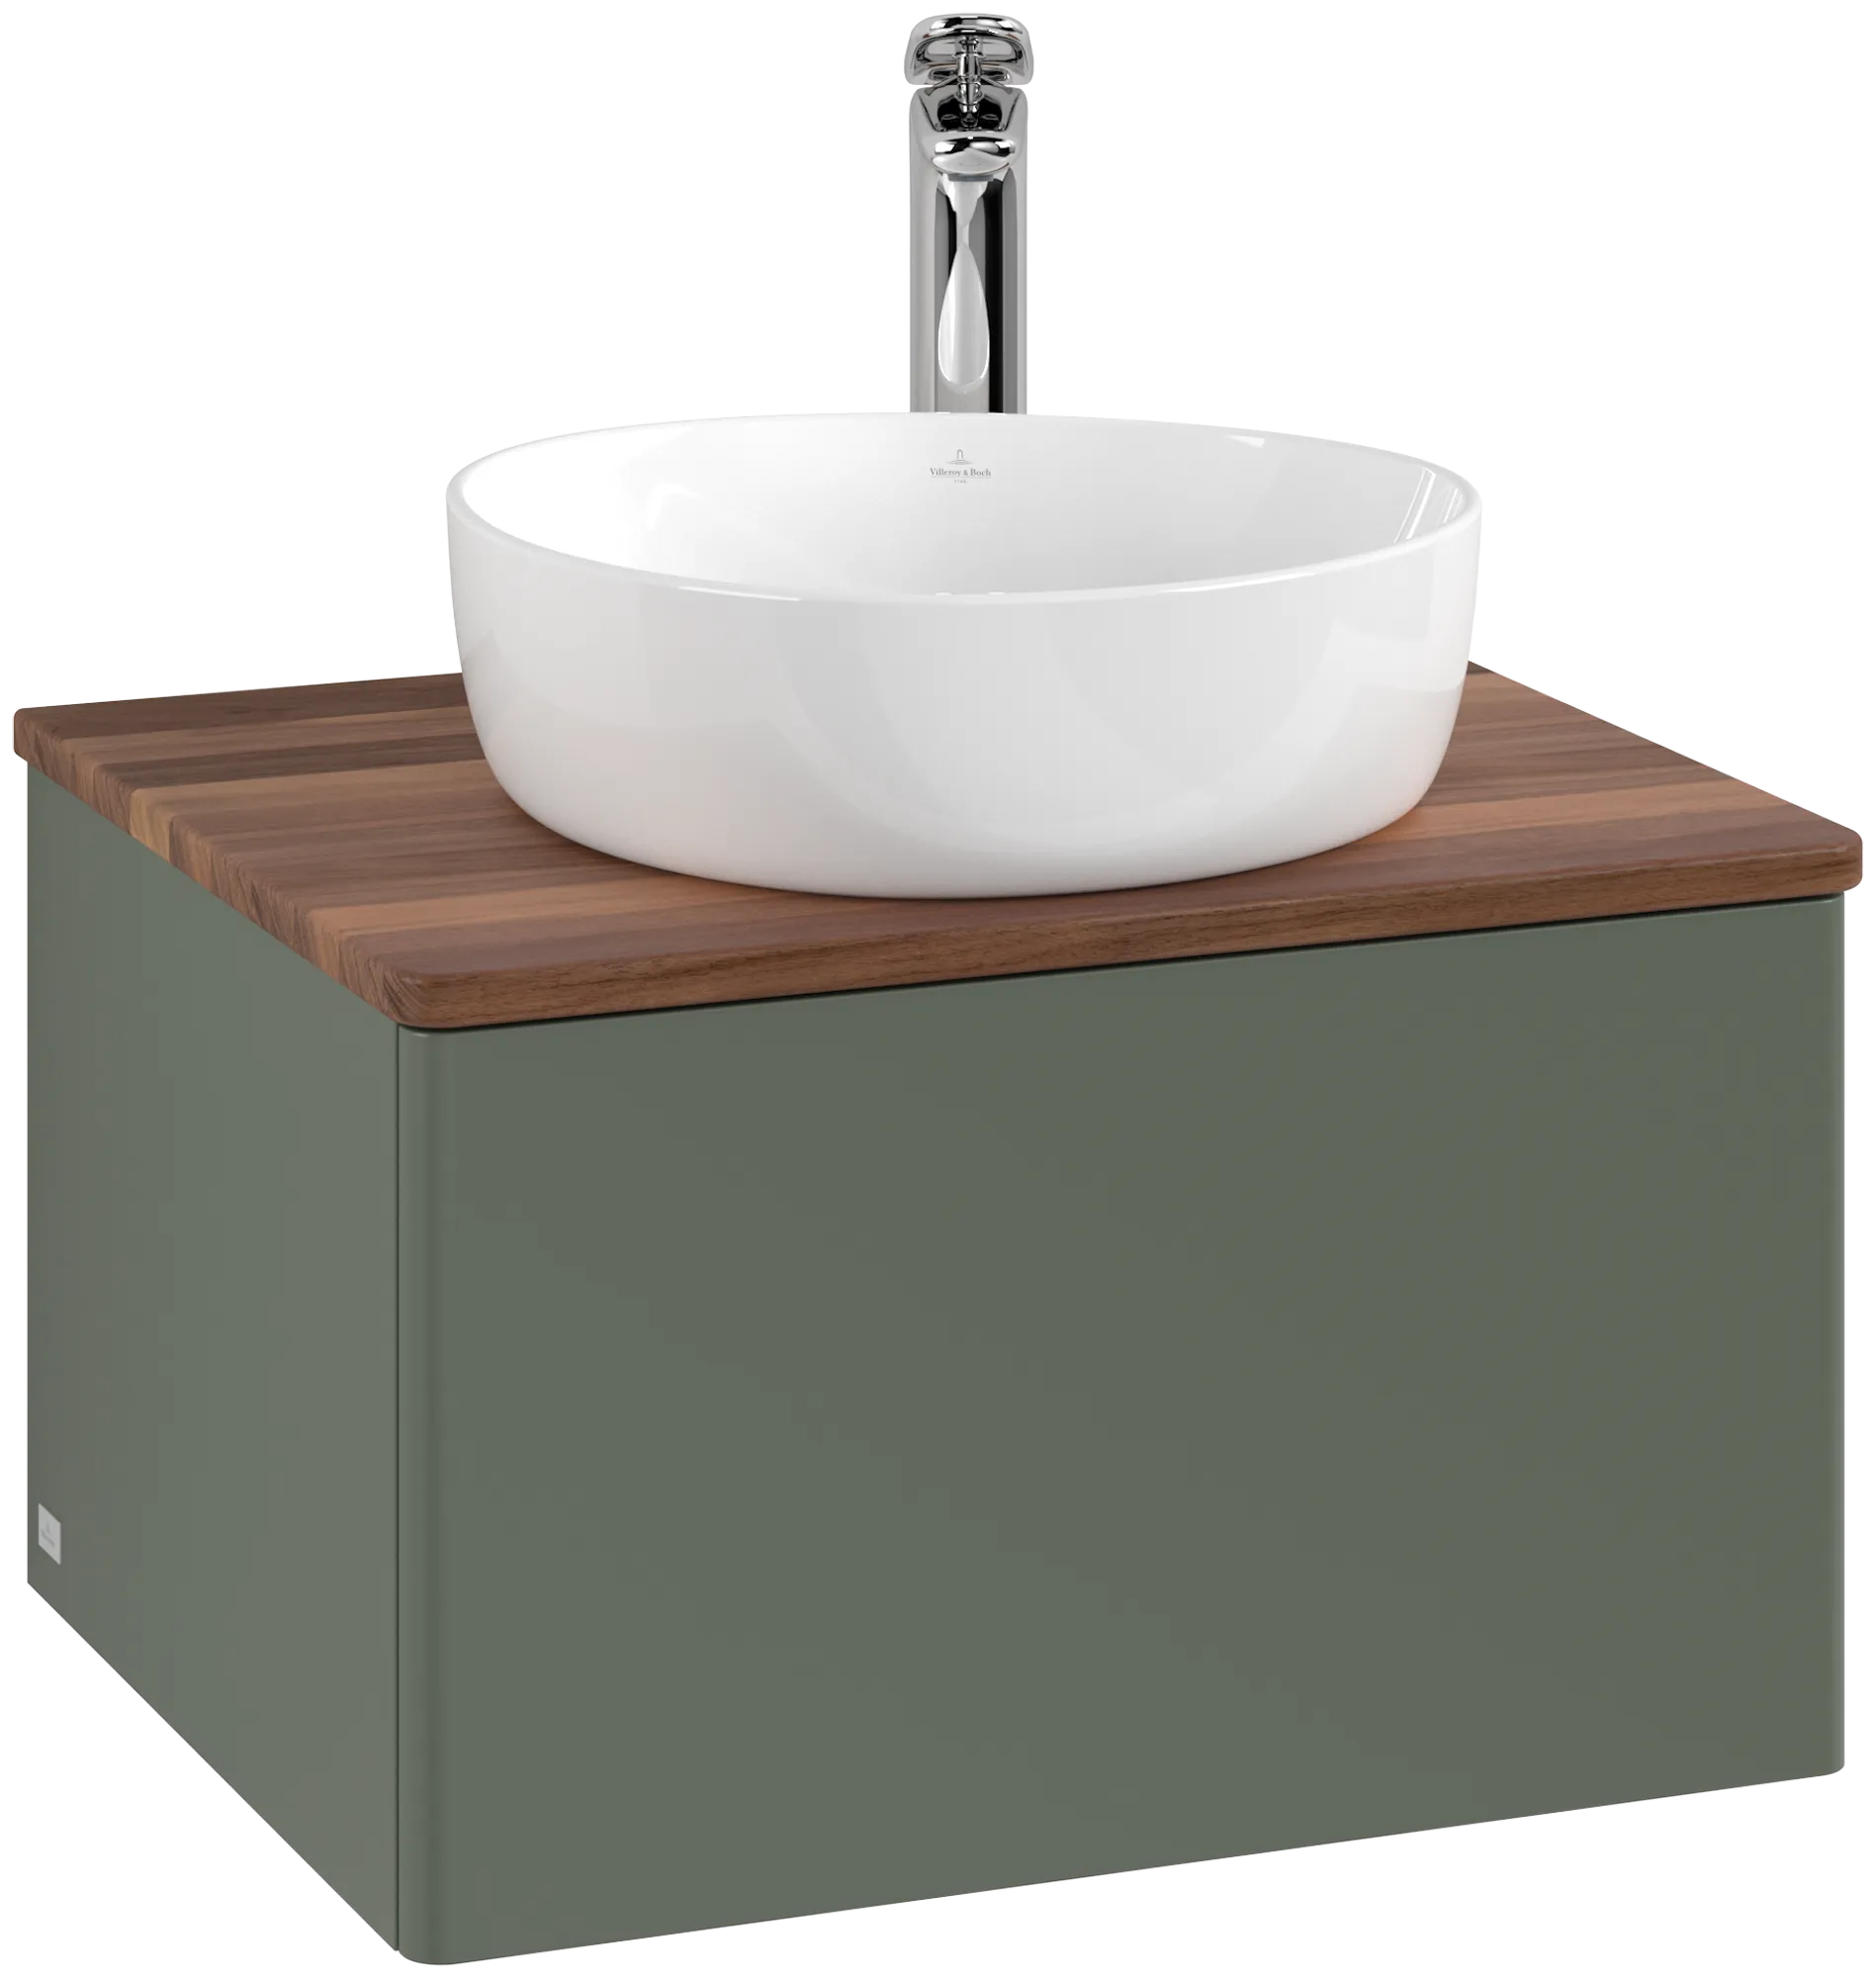 Picture of VILLEROY BOCH Antao Vanity unit, with lighting, 1 pull-out compartment, 600 x 360 x 500 mm, Front without structure, Leaf Green Matt Lacquer / Warm Walnut #L29052HL